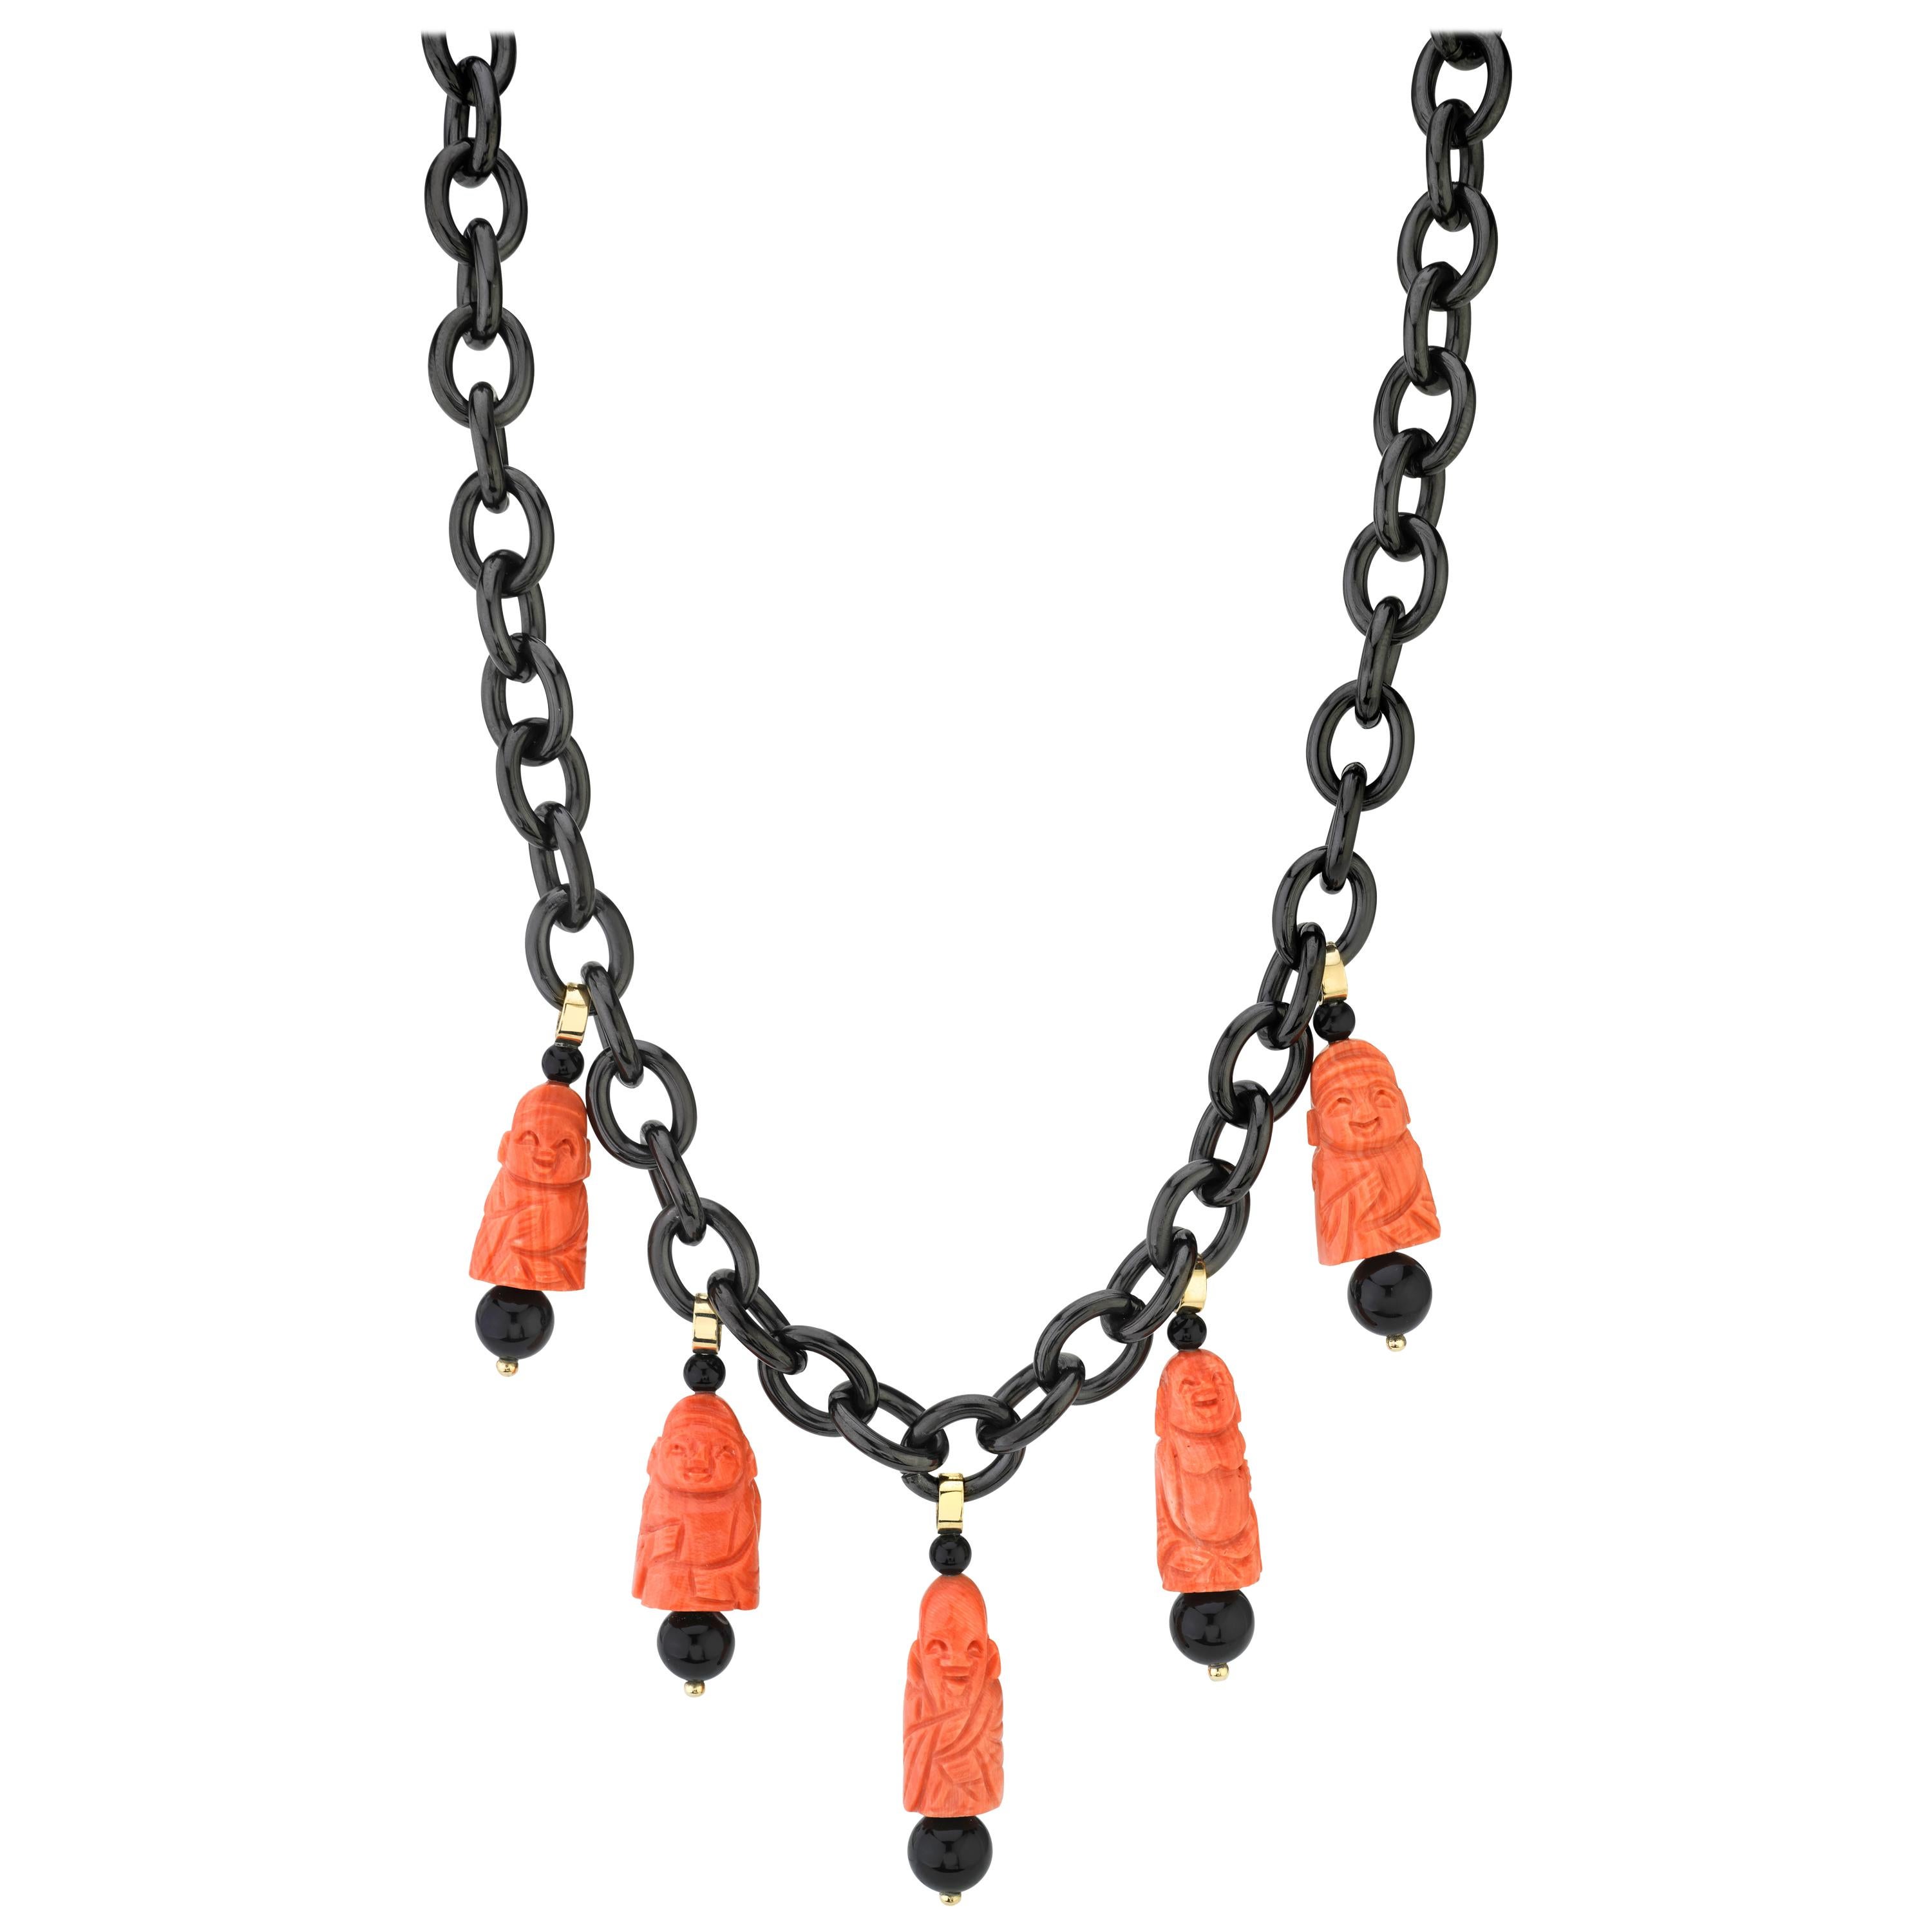 Italian Coral Carving and Onyx Charm Necklace in Gold with Blackened Steel